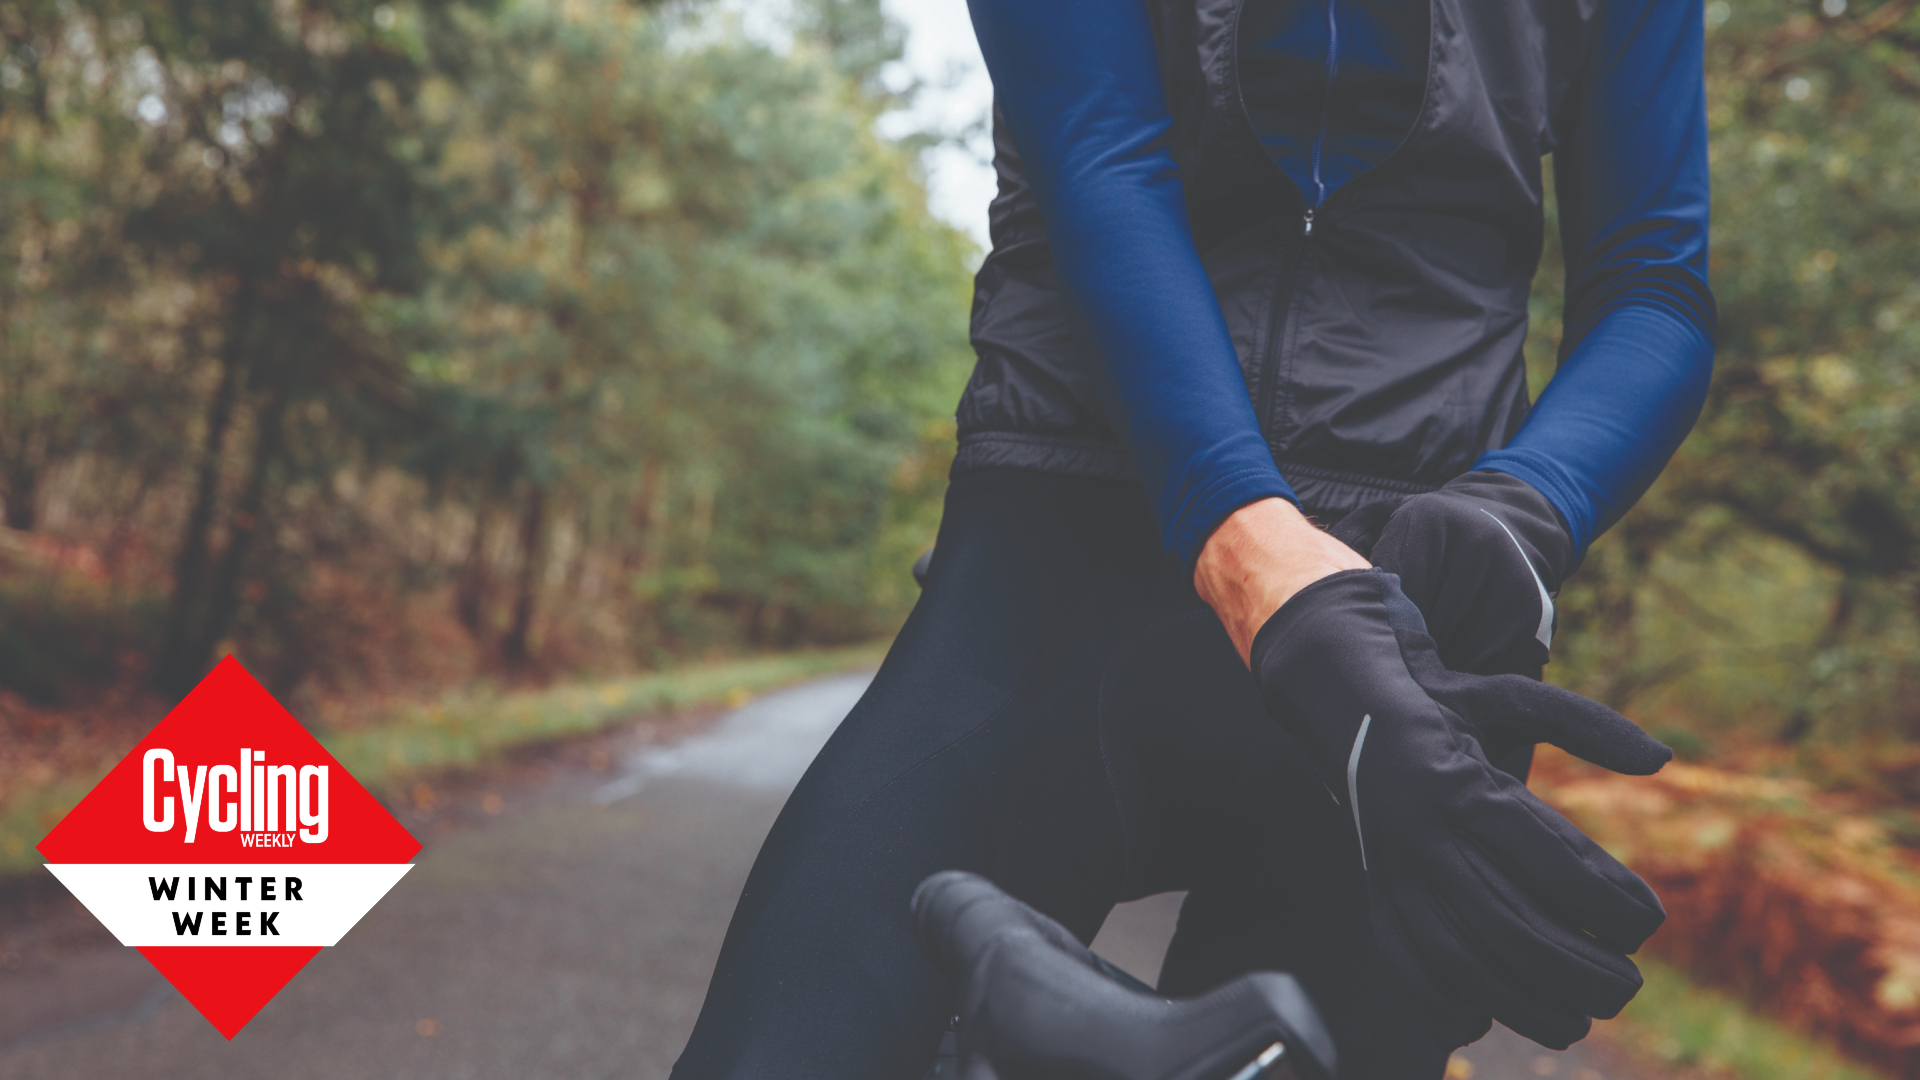 Suffering from numb feet or hands when cycling? Here's how to combat ...